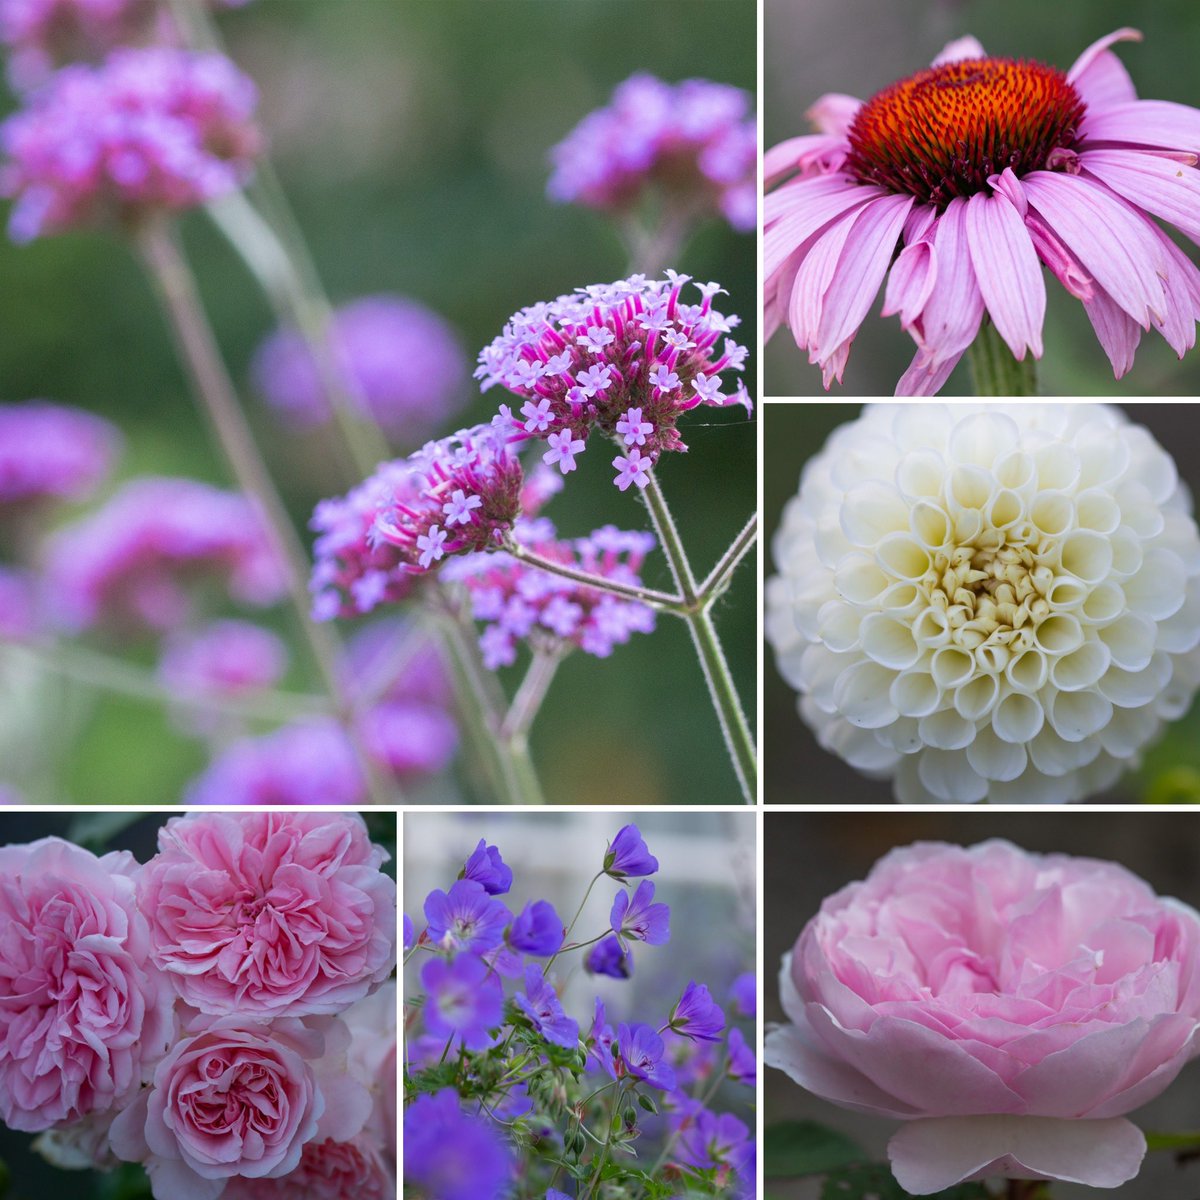 There’s so much to choose from for #SixOnSaturday! The garden is at its very best 😊🌸💕 #mygarden